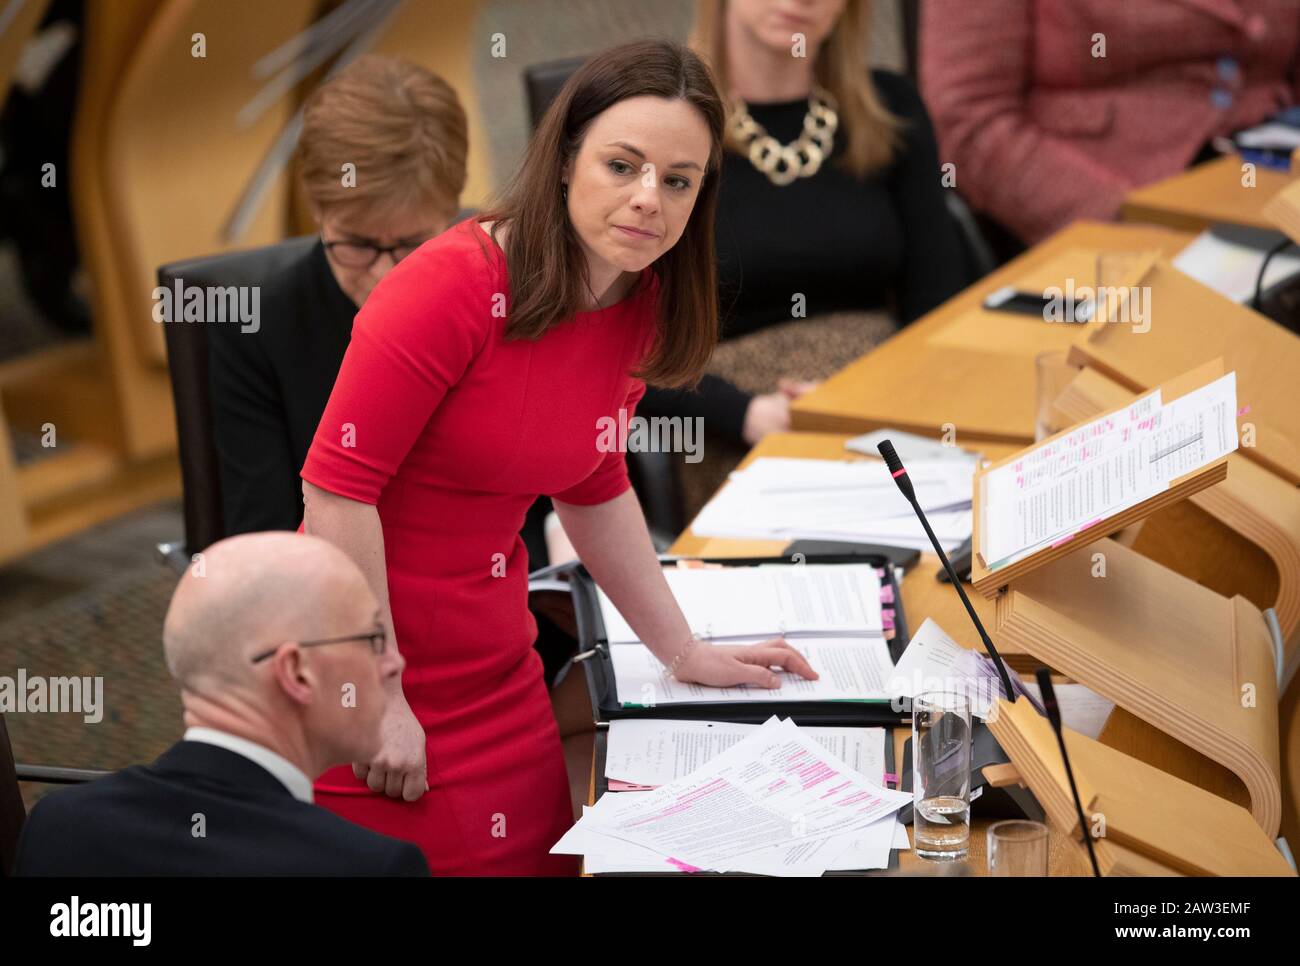 Public finance minister Kate Forbes unveils the Scottish Government's spending pledges for the next financial year in the debating chamber at the Scottish Parliament in Edinburgh. She stepped-in after Derek Mackay resigned as Finance Secretary after allegations emerged that he sent hundreds of messages to a 16-year-old boy. Stock Photo